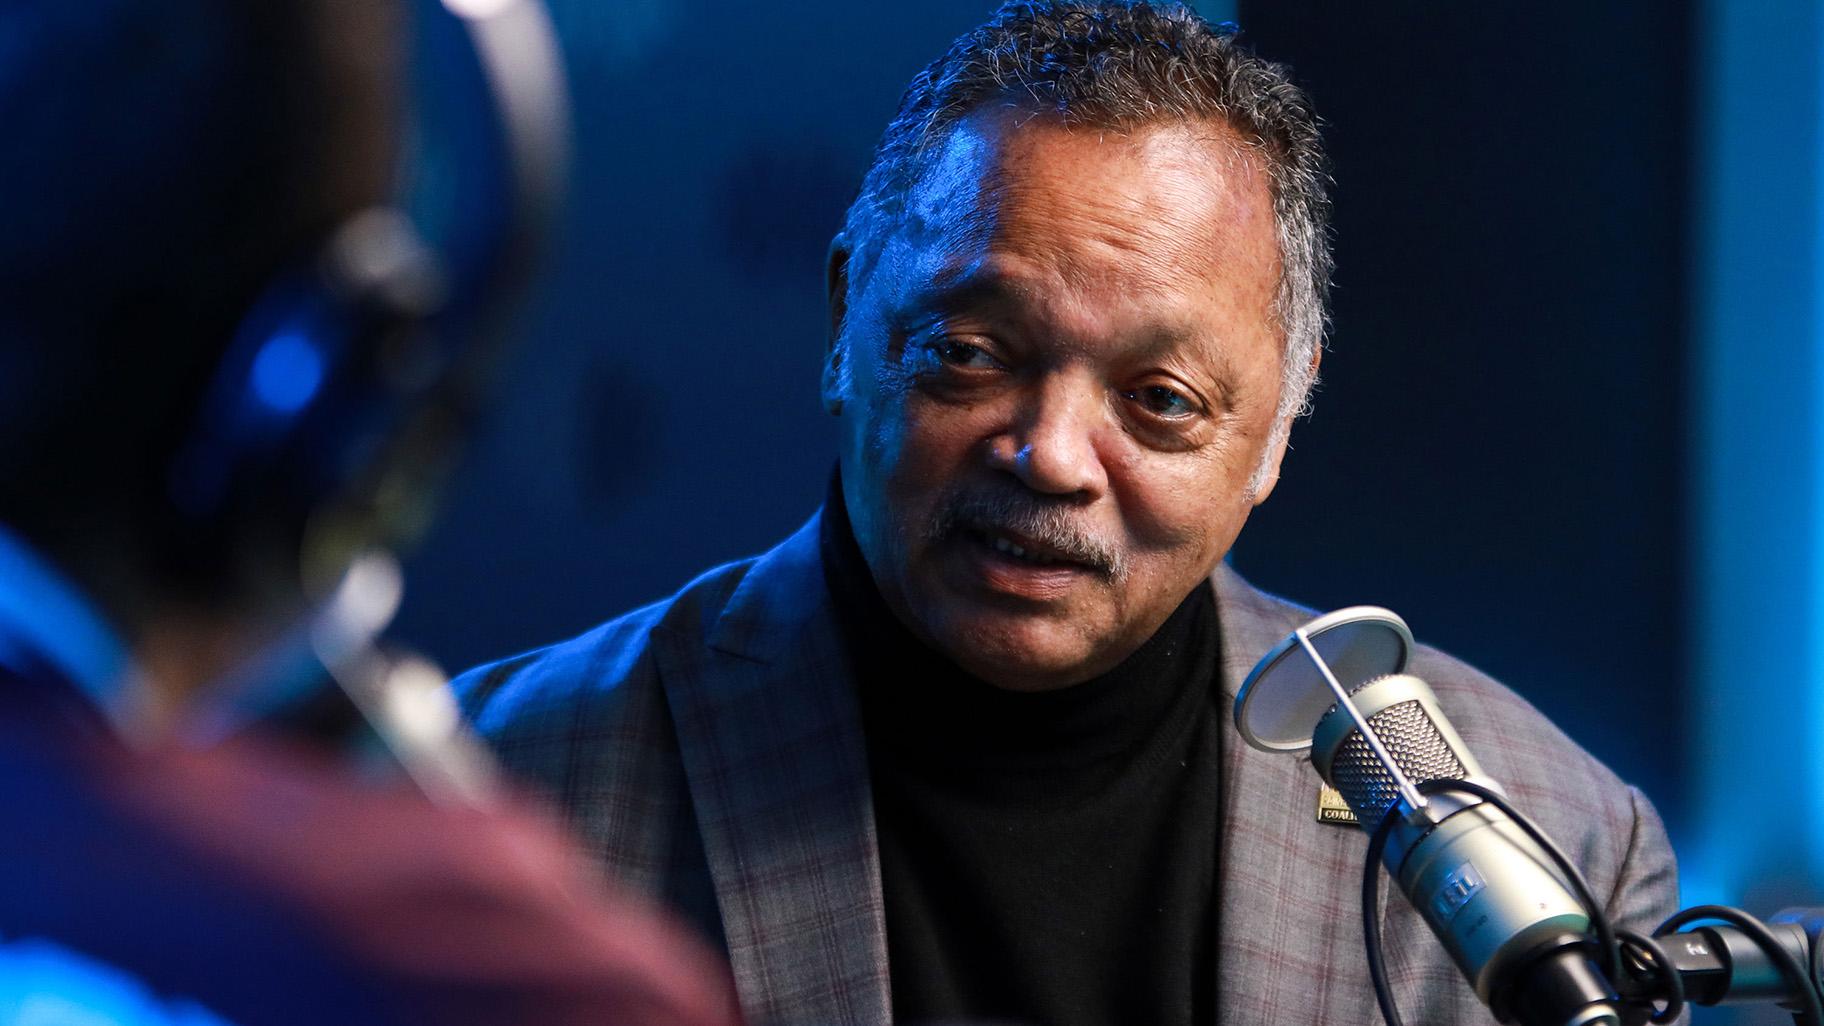 The Rev. Jesse Jackson has left the hospital for a rehabilitation center after surgery. Jackson is pictured here at SiriusXM Studios on Feb. 27, 2020 in New York City. (Jason Mendez / Getty Images)